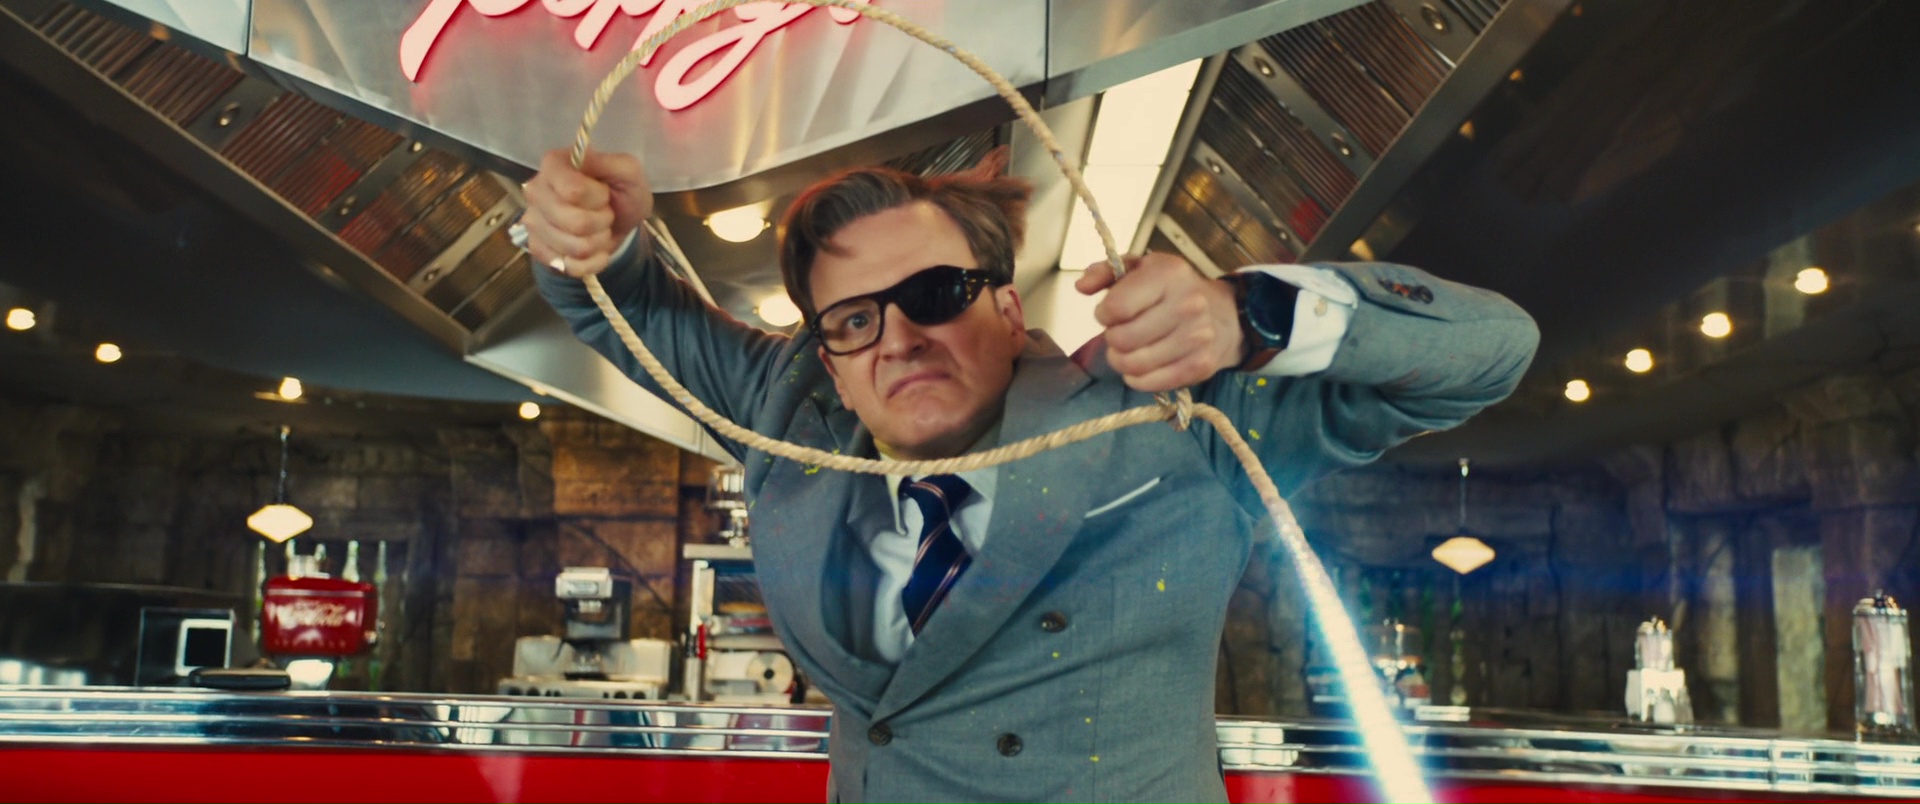 TAG Heuer Smartwatch Used by Colin Firth in Kingsman 2: The Golden Circle (...